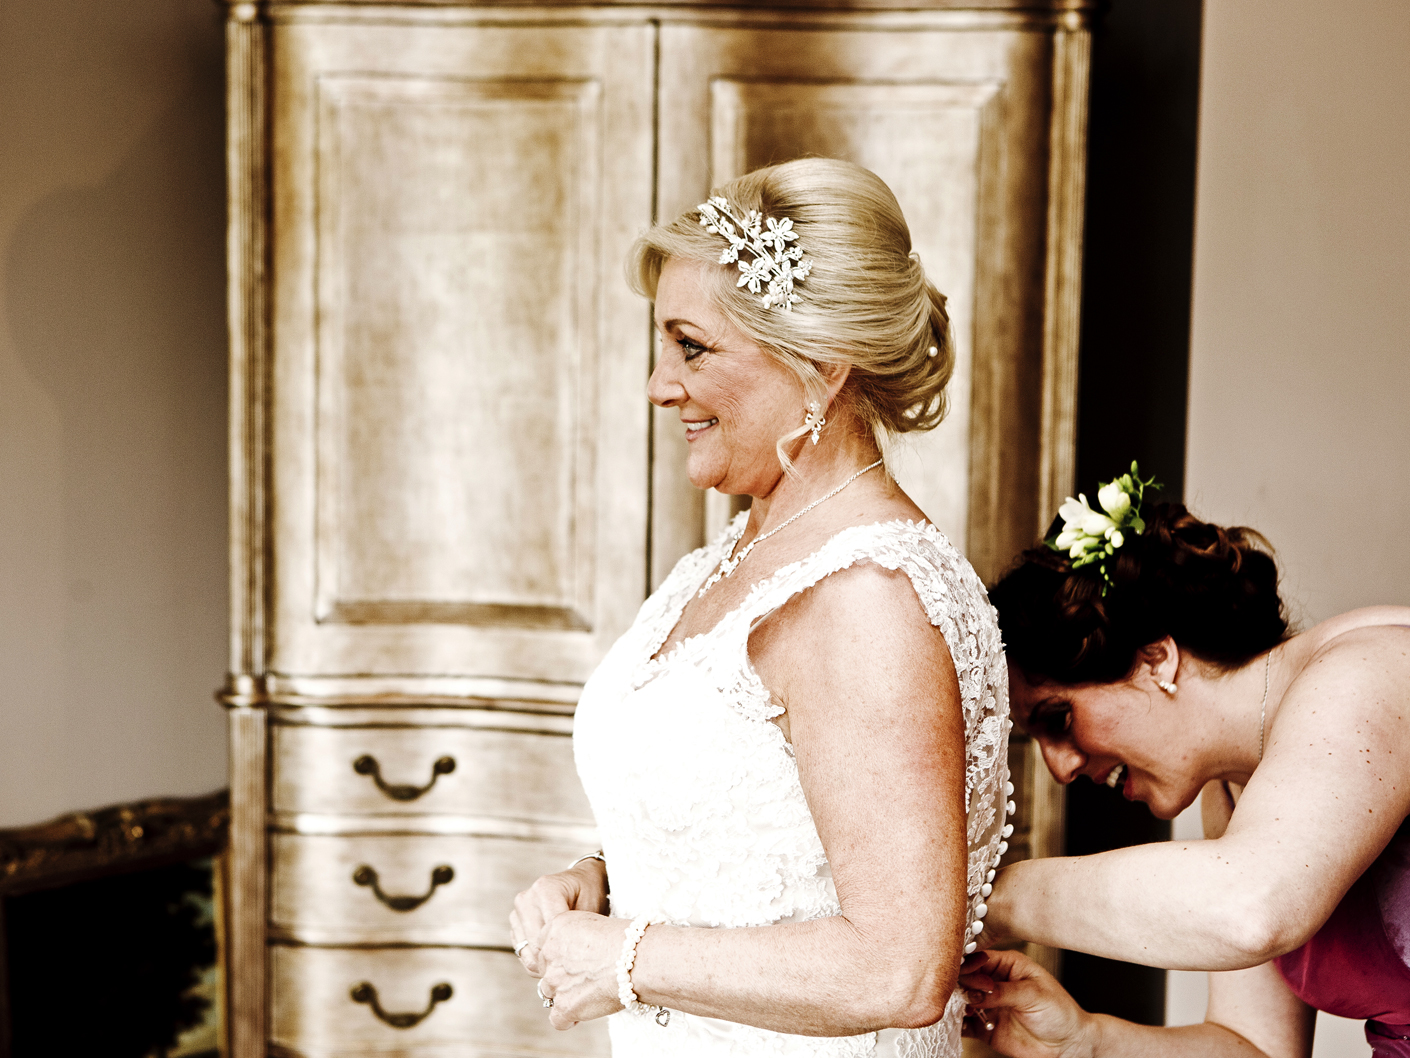 wedding-photography-of-the-bride-before-the-wedding-ceremony-in-manchester